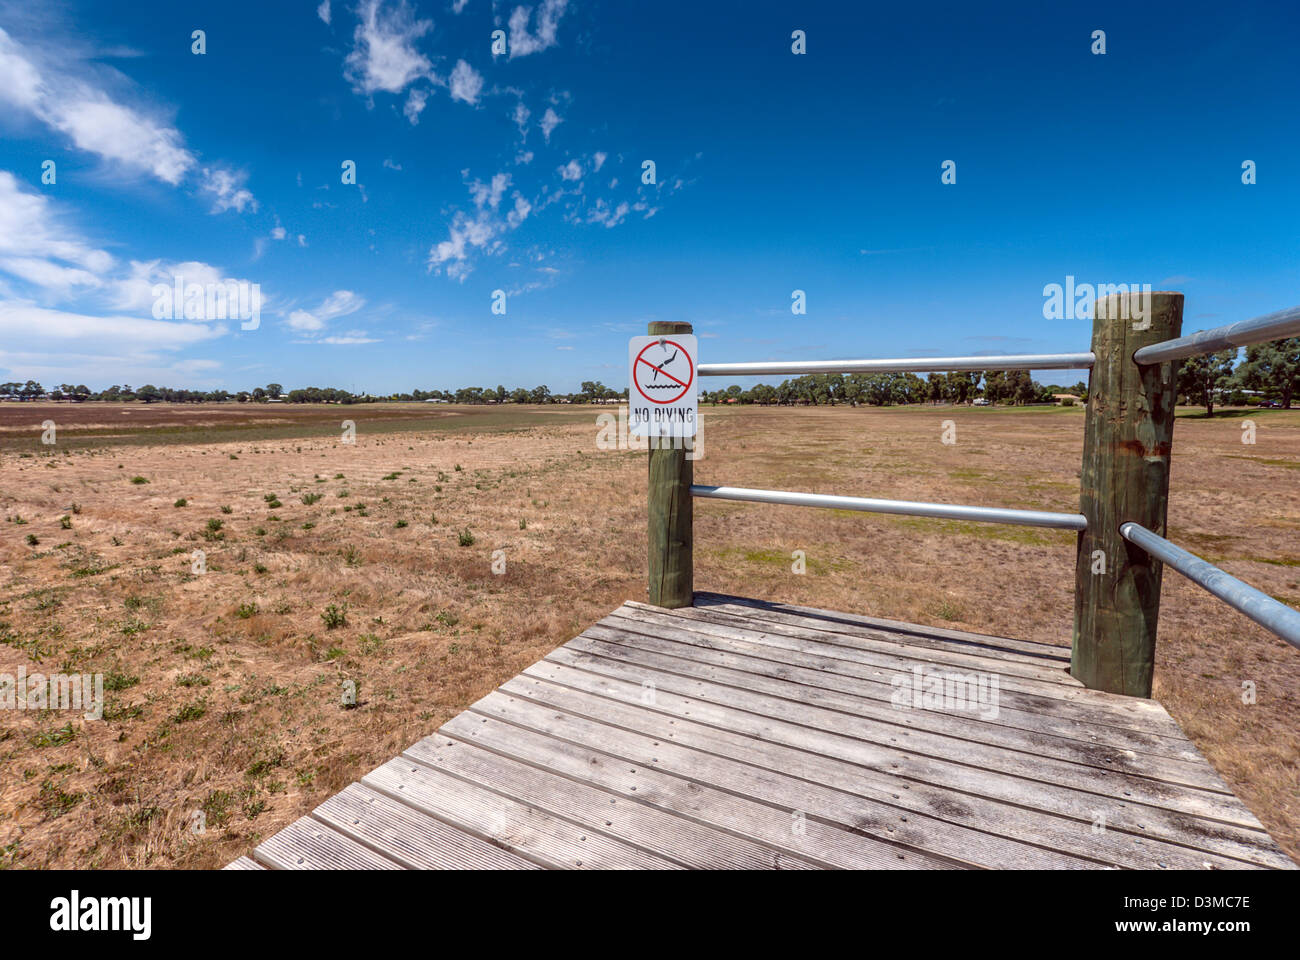 Lake Wallace dried up during a drought in Australia. Stock Photo